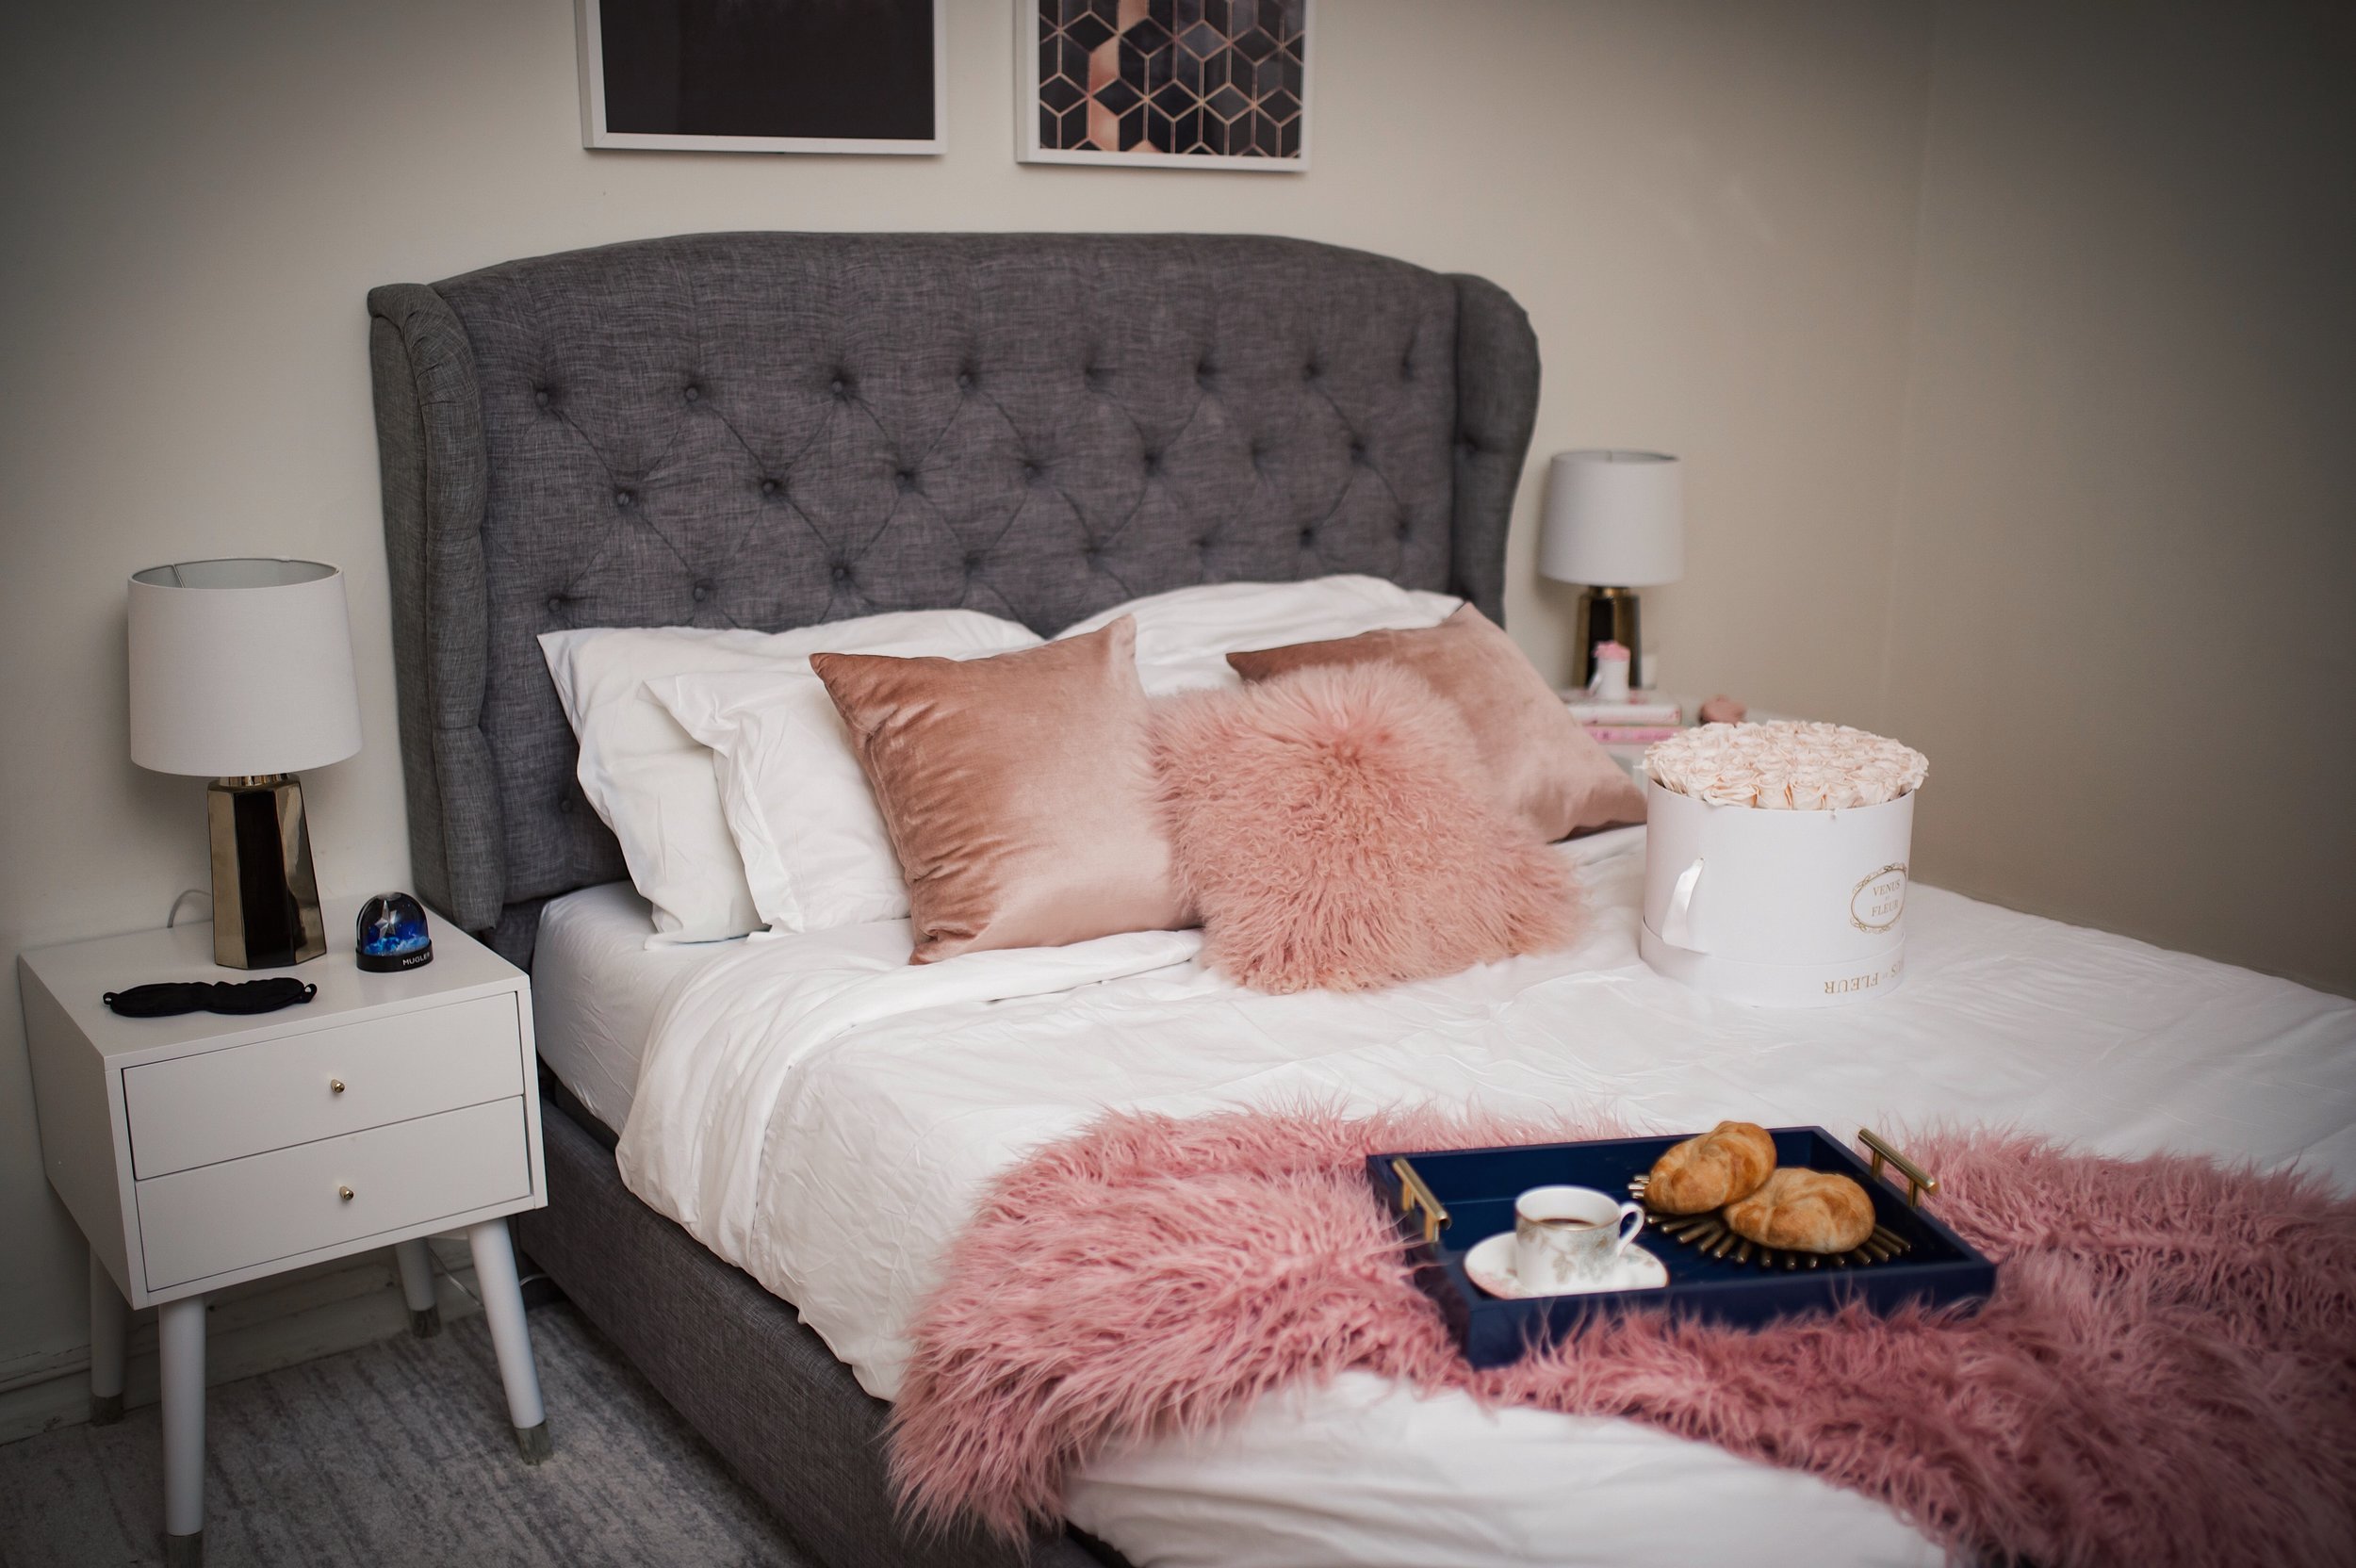 My Bedroom Reveal Joss & Main Esther Santer Fashion Blog NYC Street Style Blogger White Duvet Cover Pink Furry Throw Pillows Blanket Blush Gold Lamps Grey Bed Headboard Shopping Buy Beautiful Room Furniture White Nightstands Navy Tray Art  Breakfast.jpg